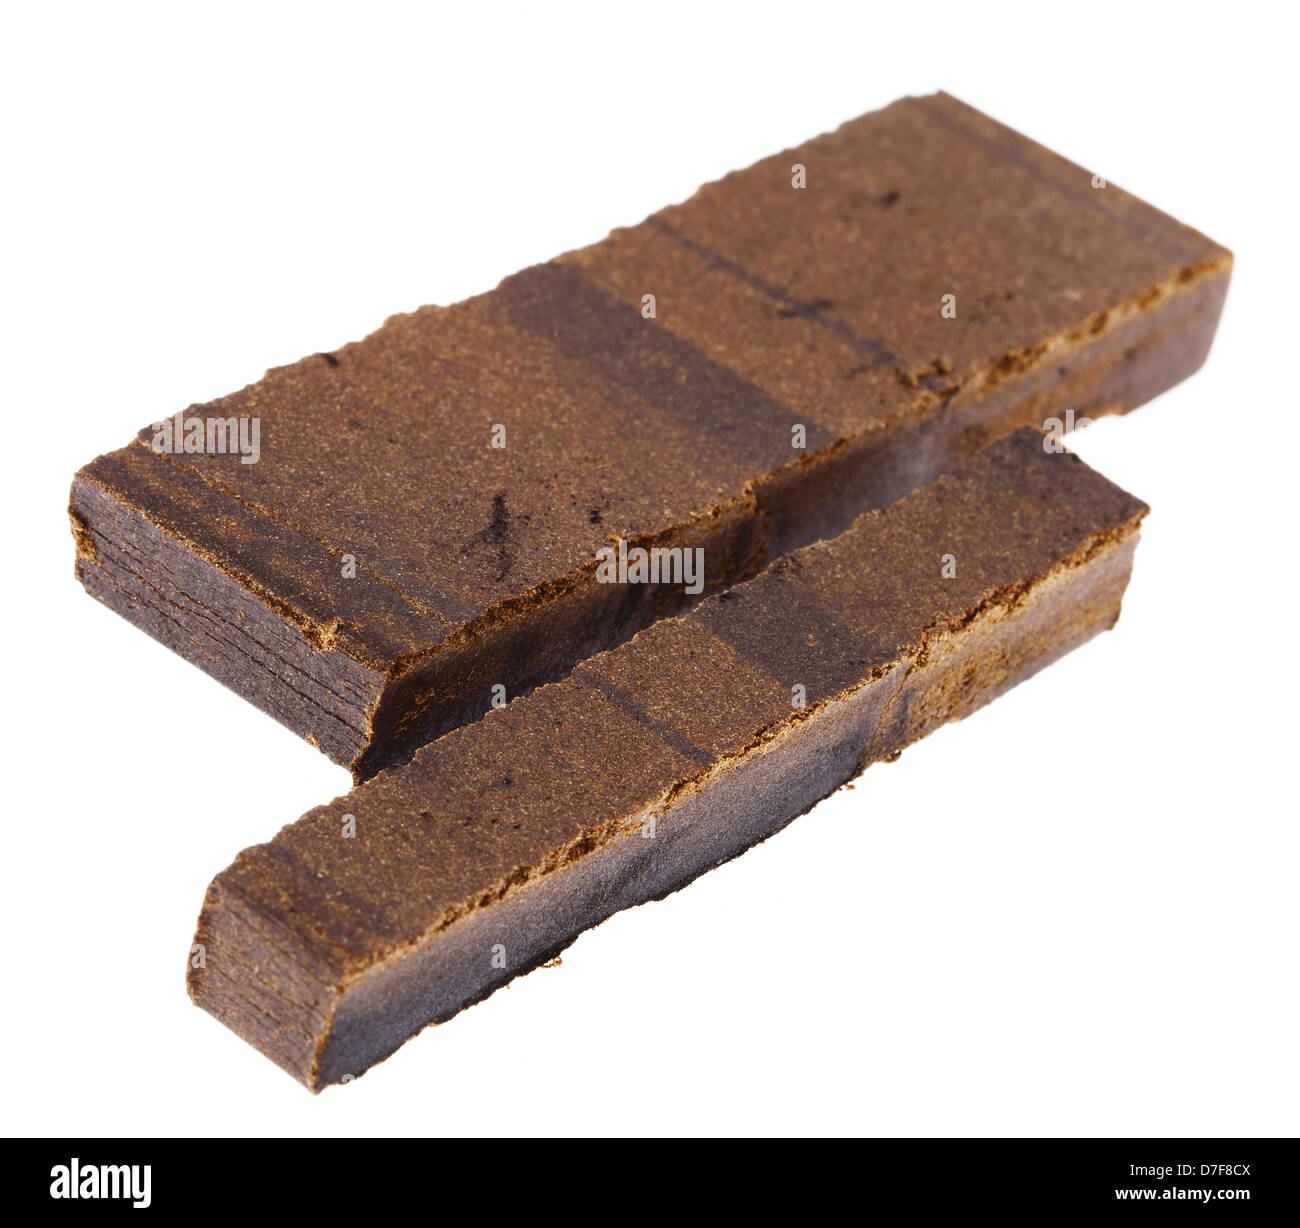 A 10 grams piece Hashish laid next to 20 grams piece isolated on white background. This pieces represent quantity three retail Stock Photo